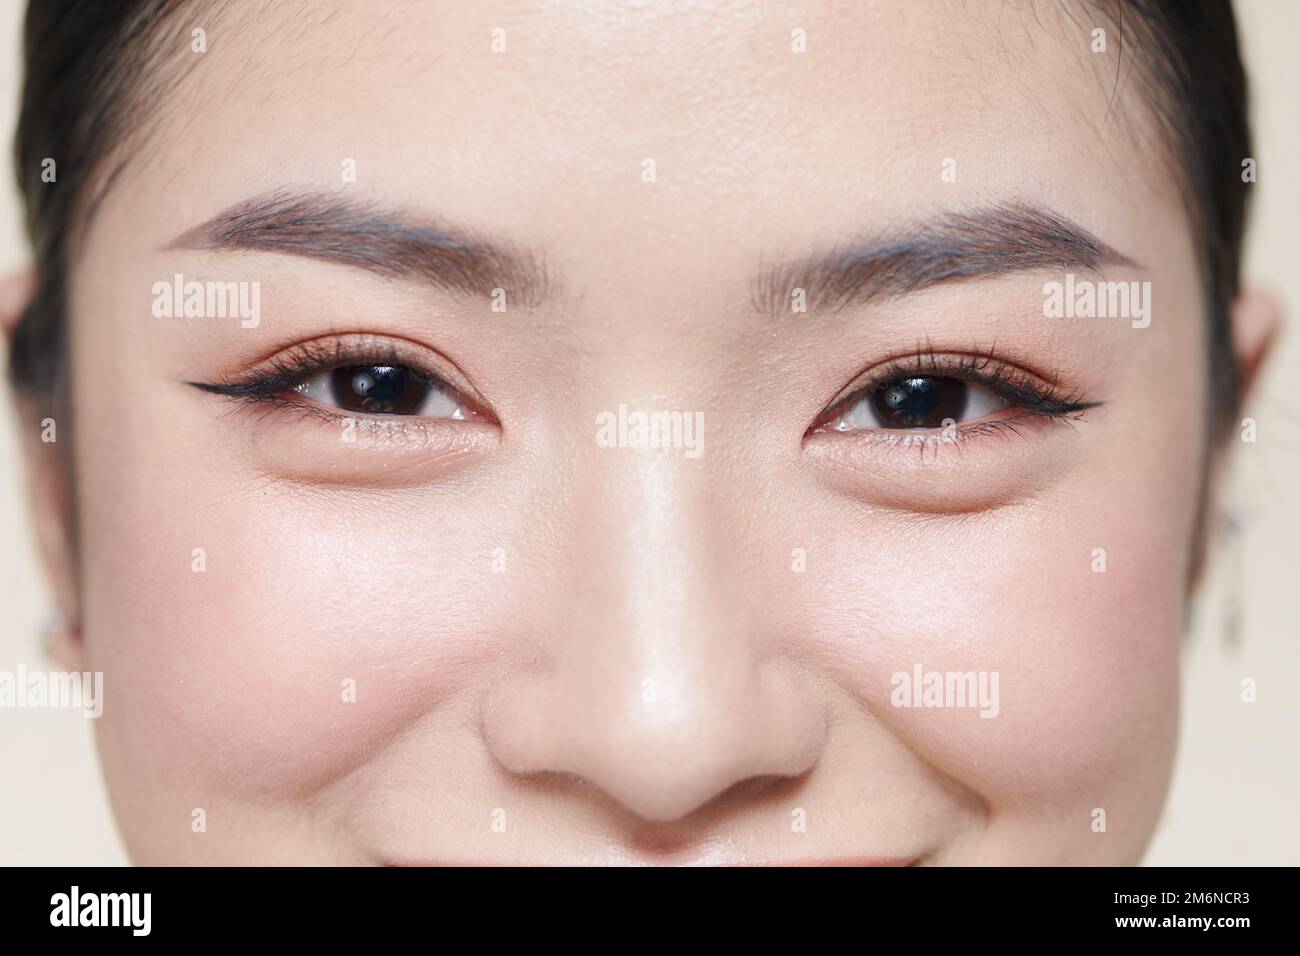 A half of a beautiful female's face with eye bags Stock Photo